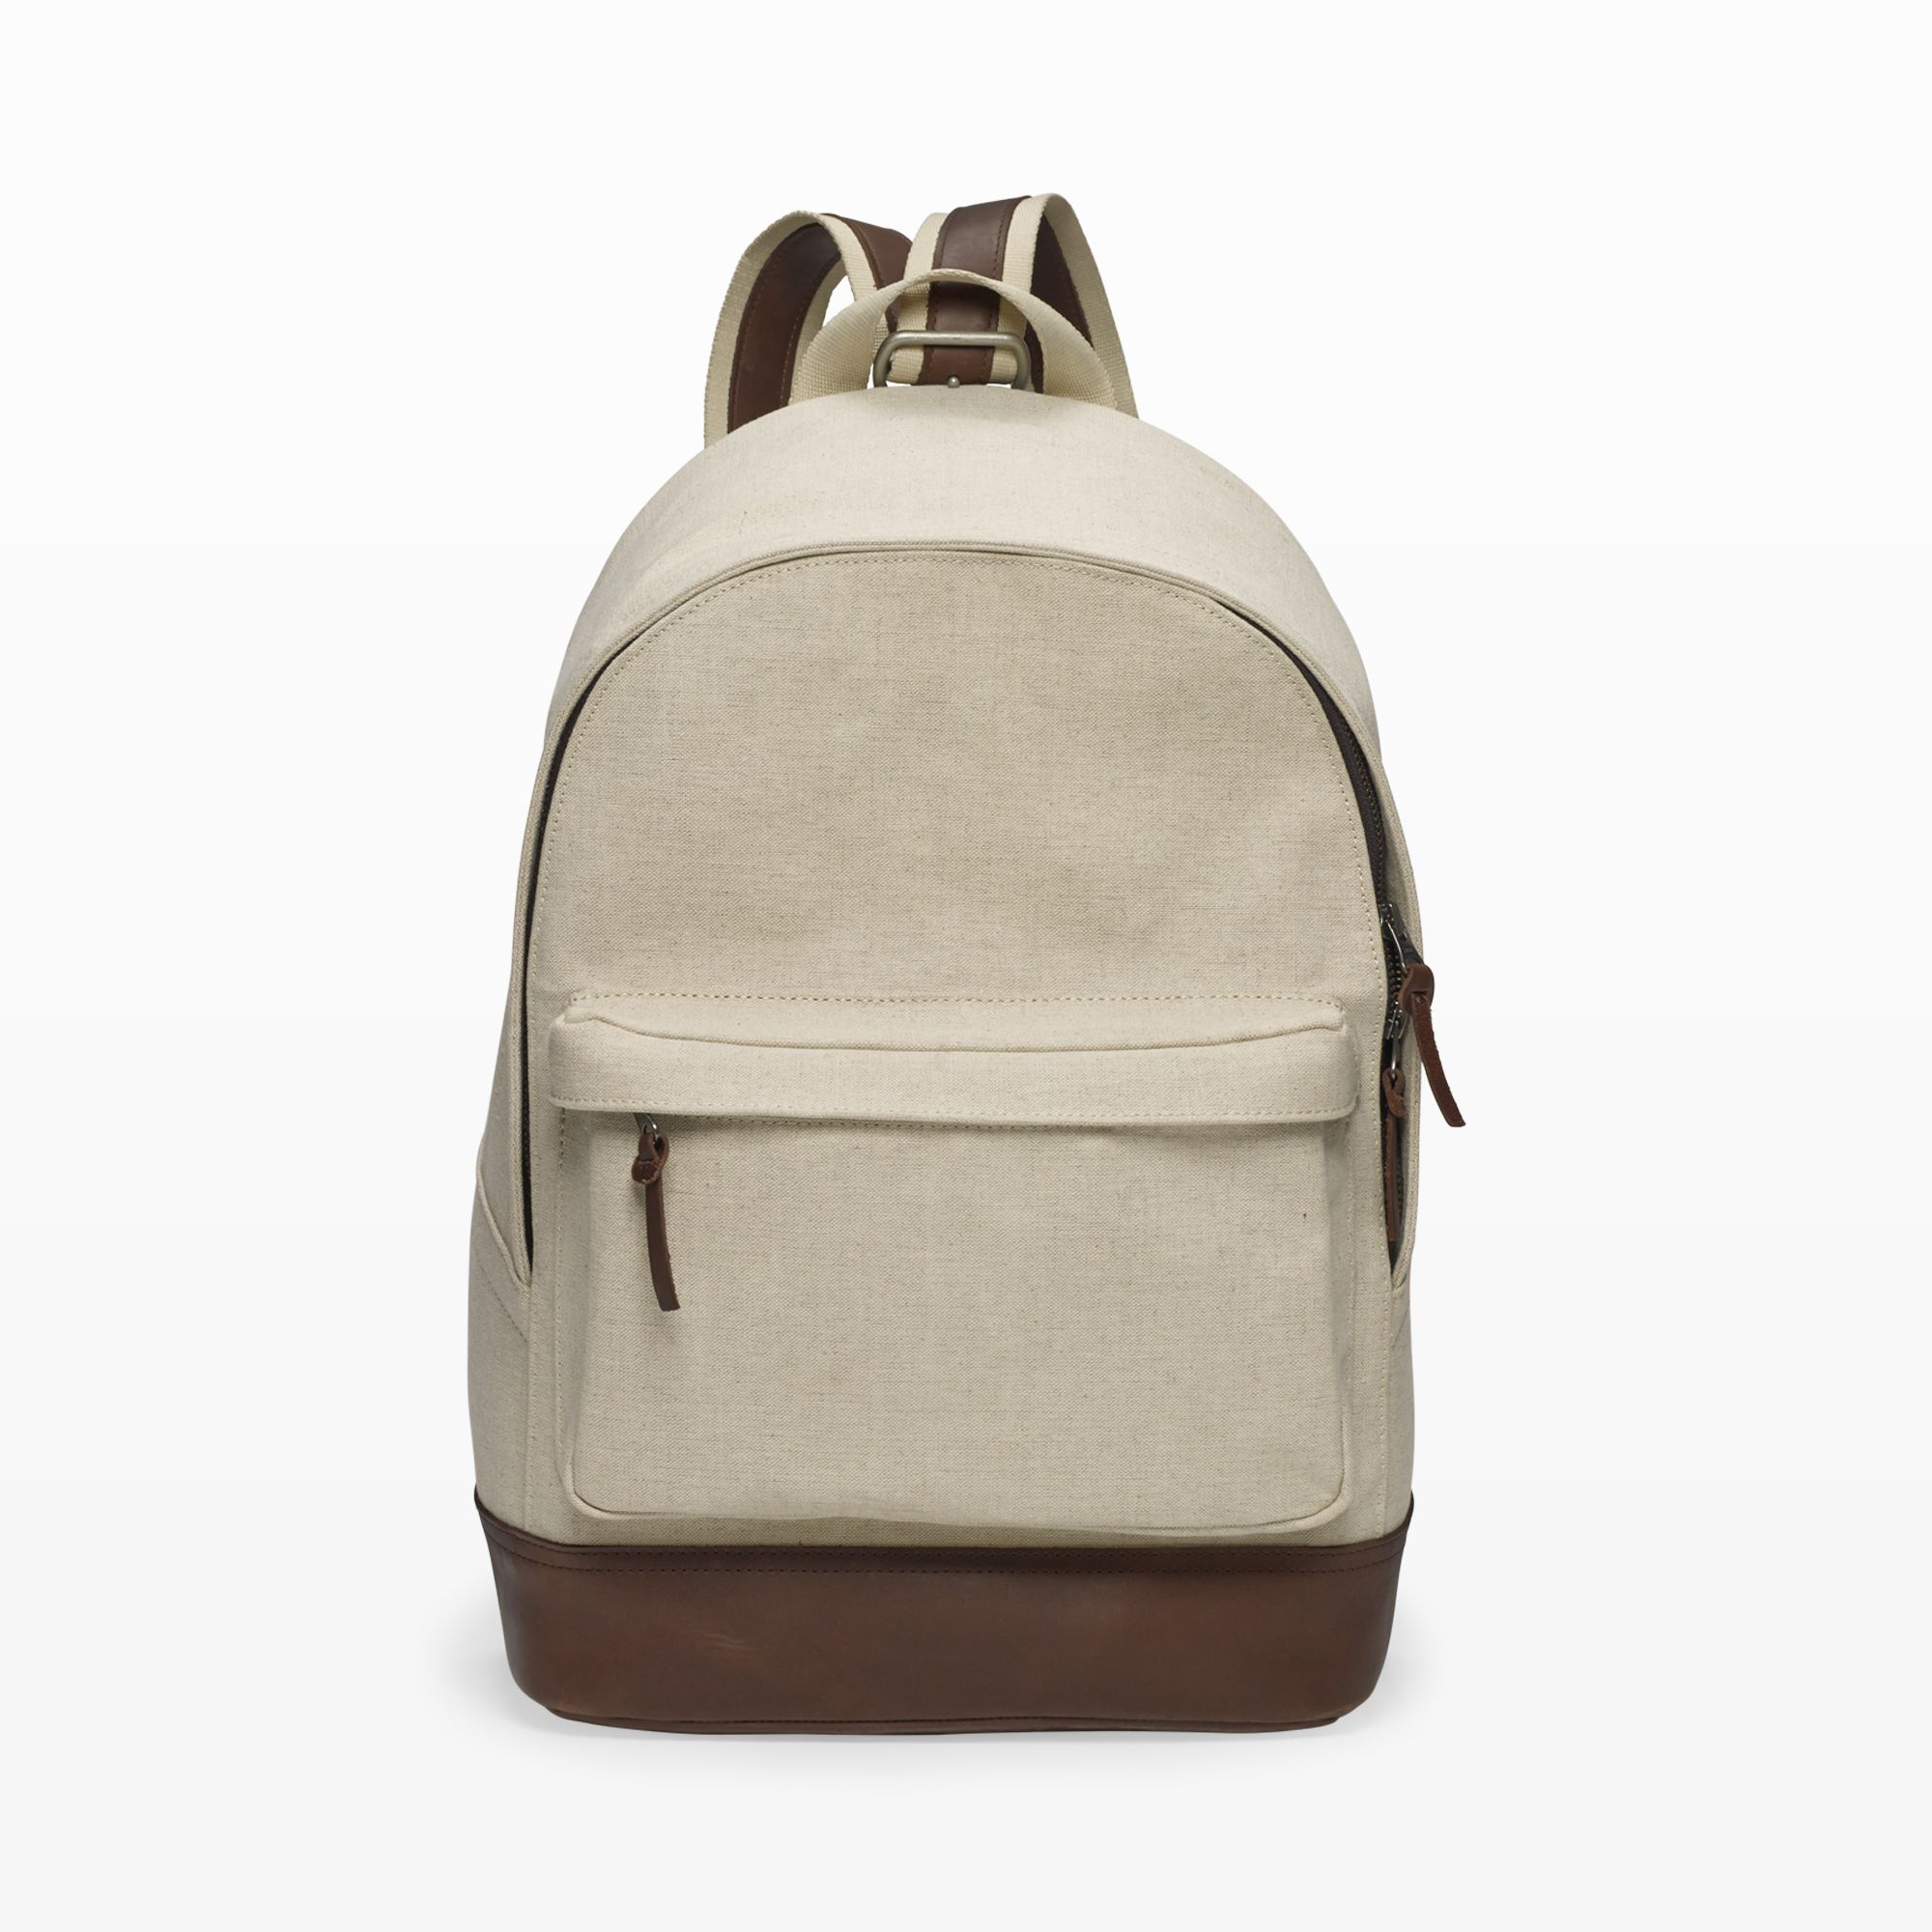 Lyst - Club Monaco Canvas & Leather Backpack in Natural for Men